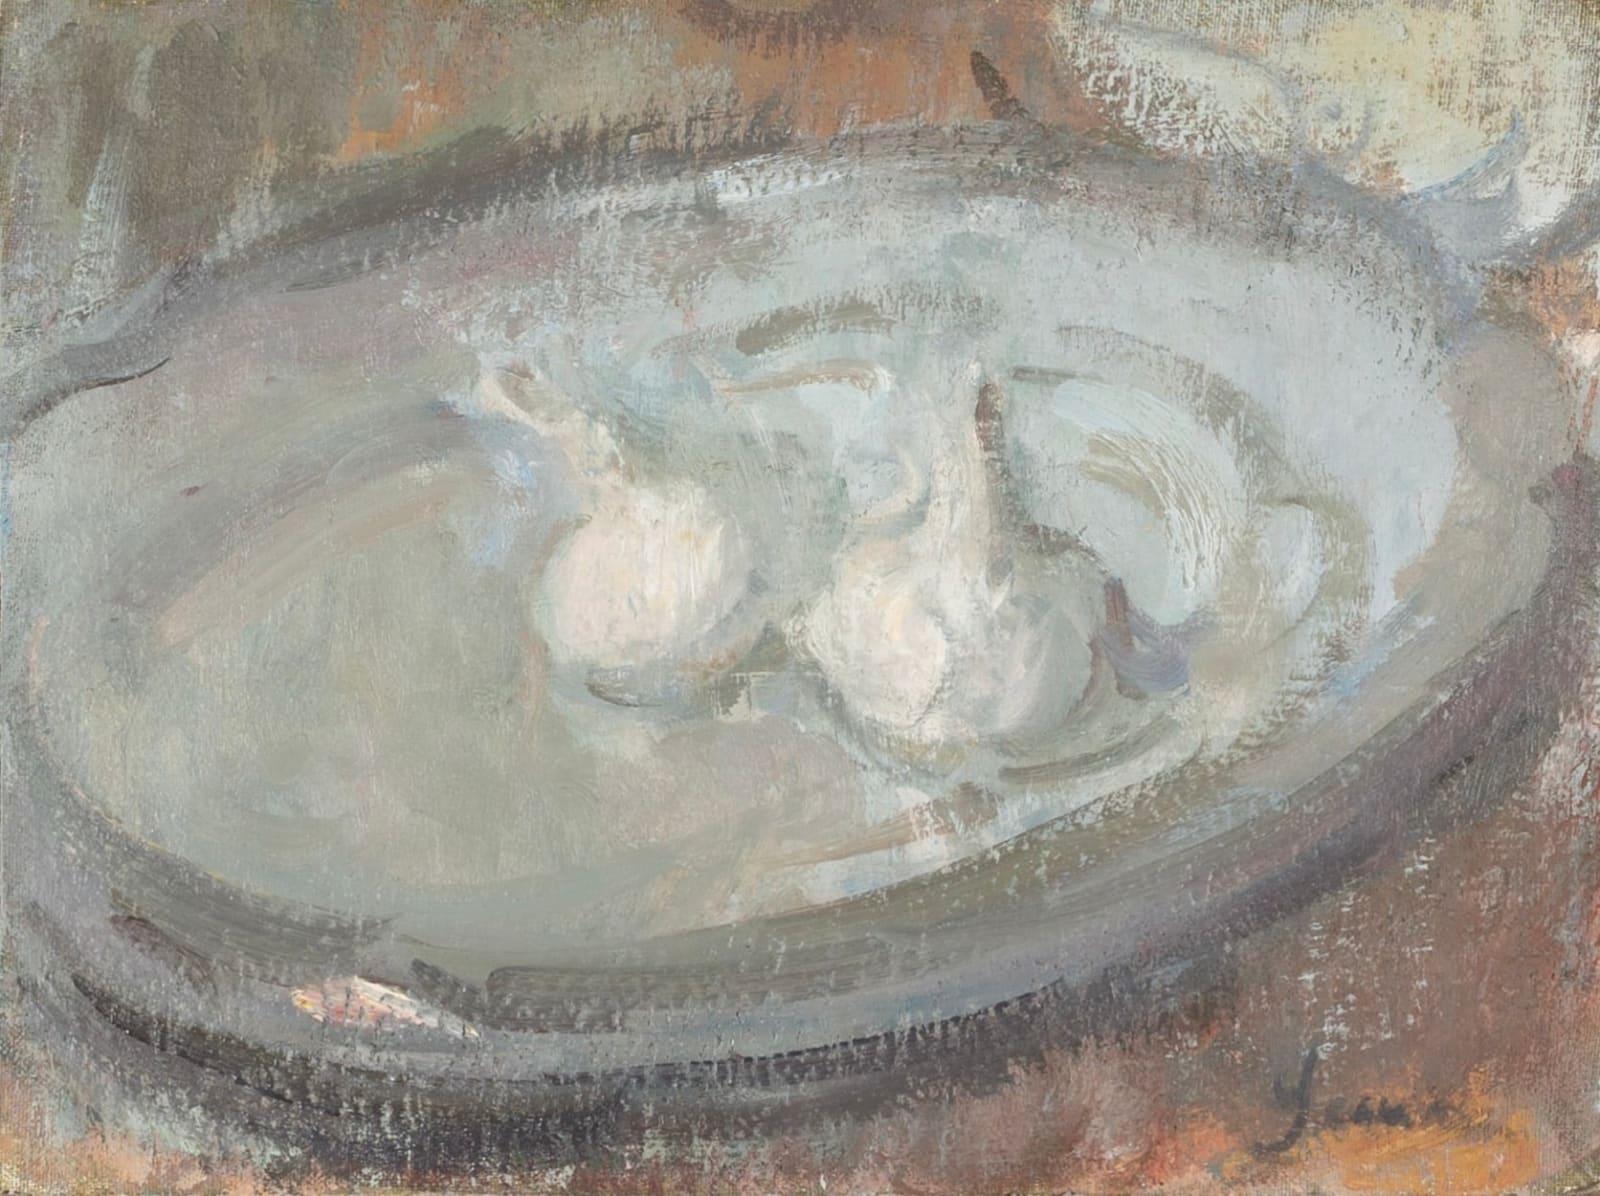 Two Garlic on French Plate Painting by Martin Yeoman B. 1953, 2016

Additional information:
Medium: Oil on panel
Dimensions: 23.5 x 31 cm
9 1/4 x 12 1/4 in

Martin Yeoman was born in 1953, and studied with Peter Greenham at the Royal Academy